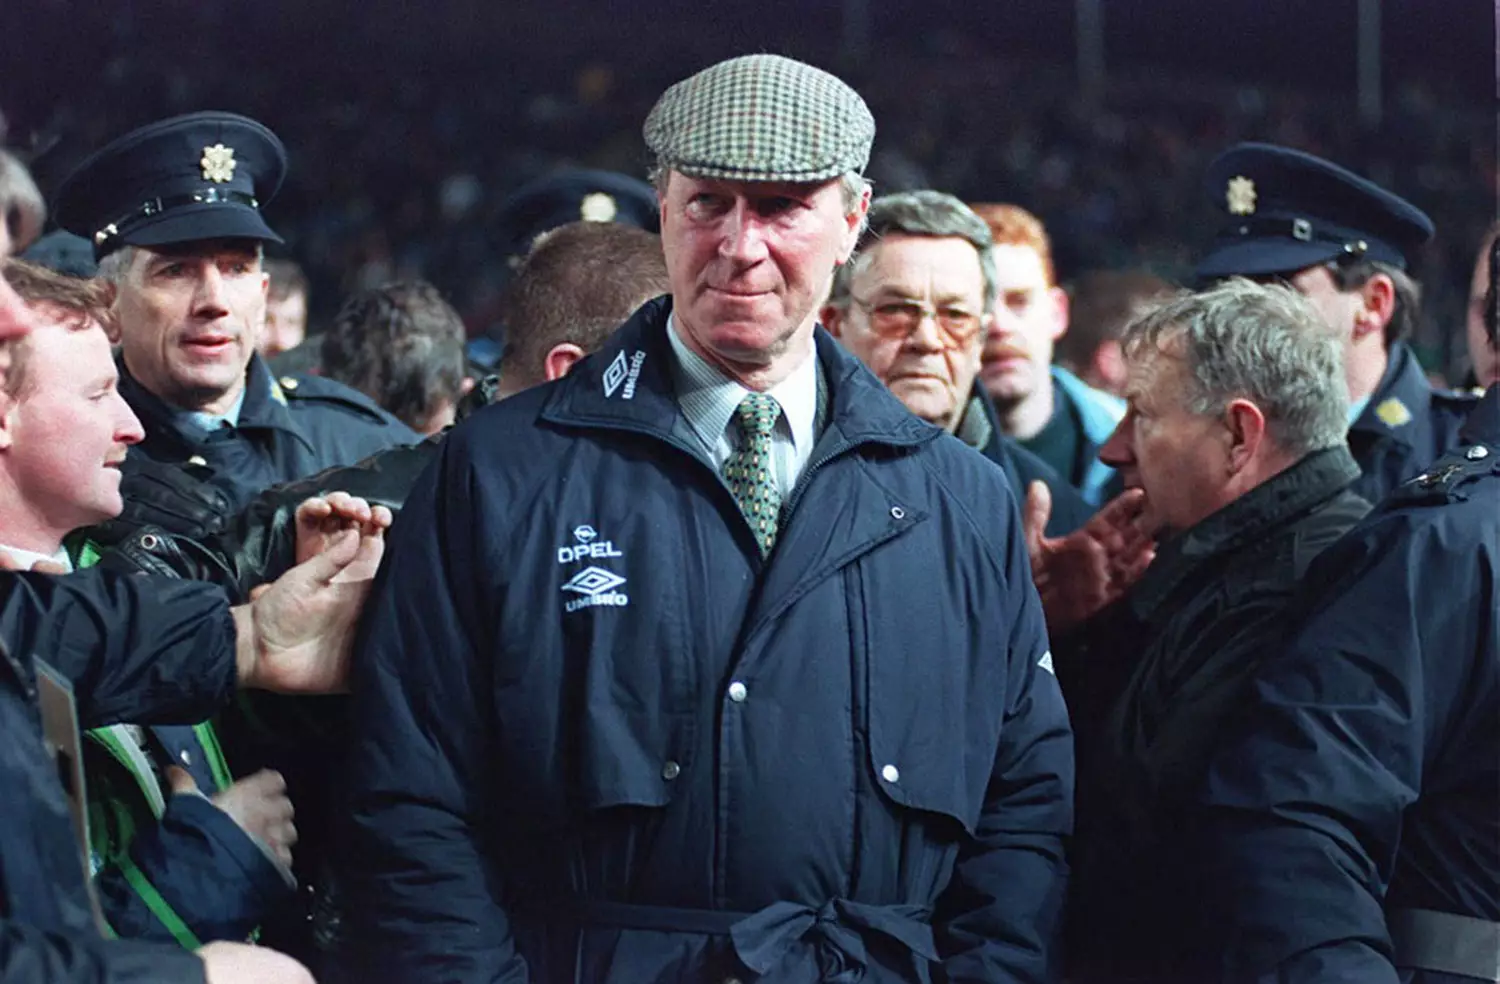 Jack Charlton in 1995 during his time as the Republic of Ireland team's manager.